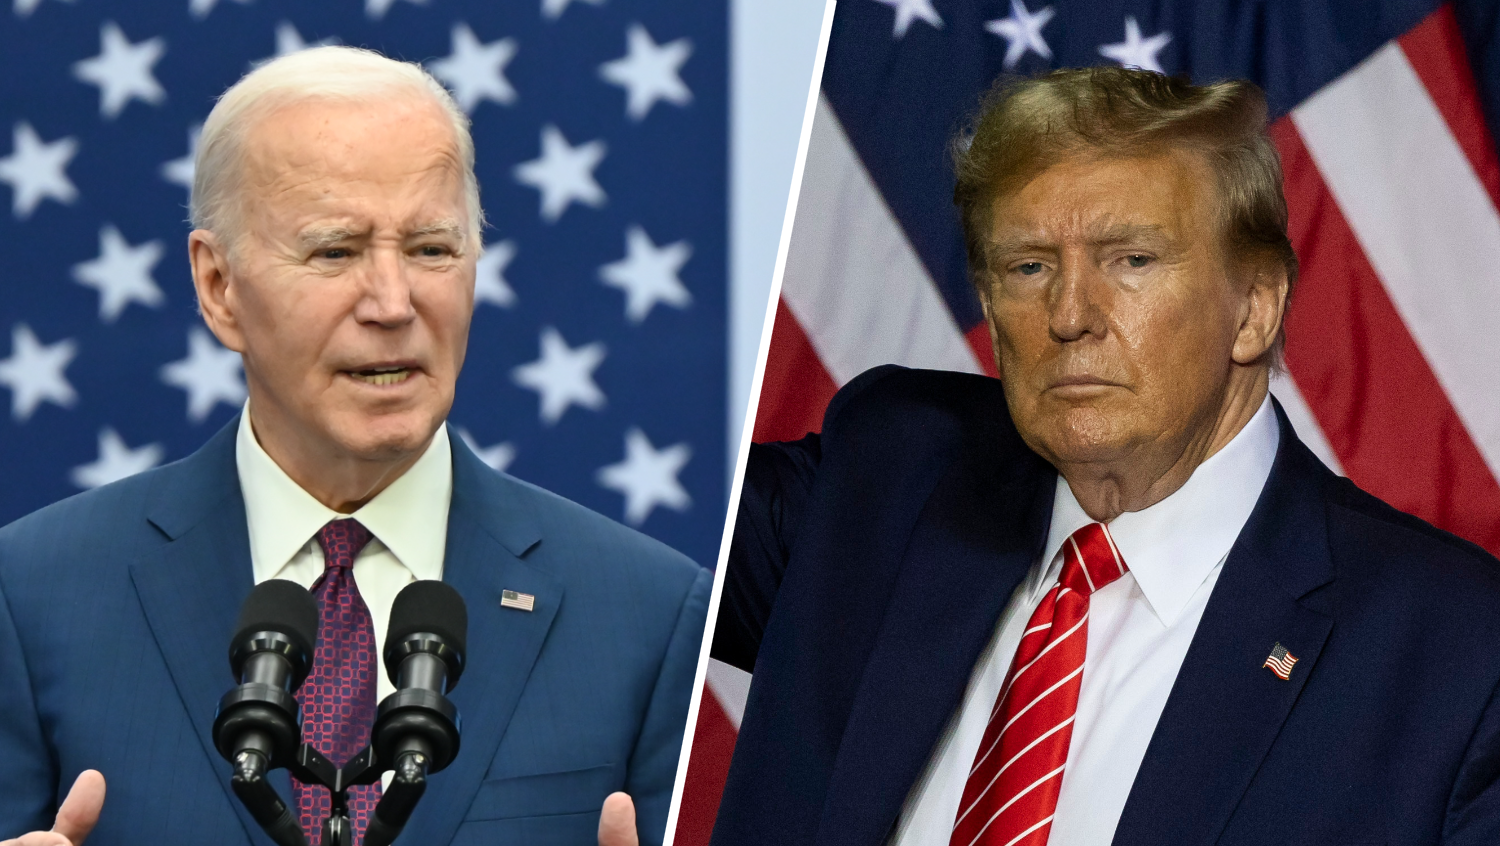 Biden and Trump notch wins in Tuesday's primaries. Other races will
offer hints on national politics